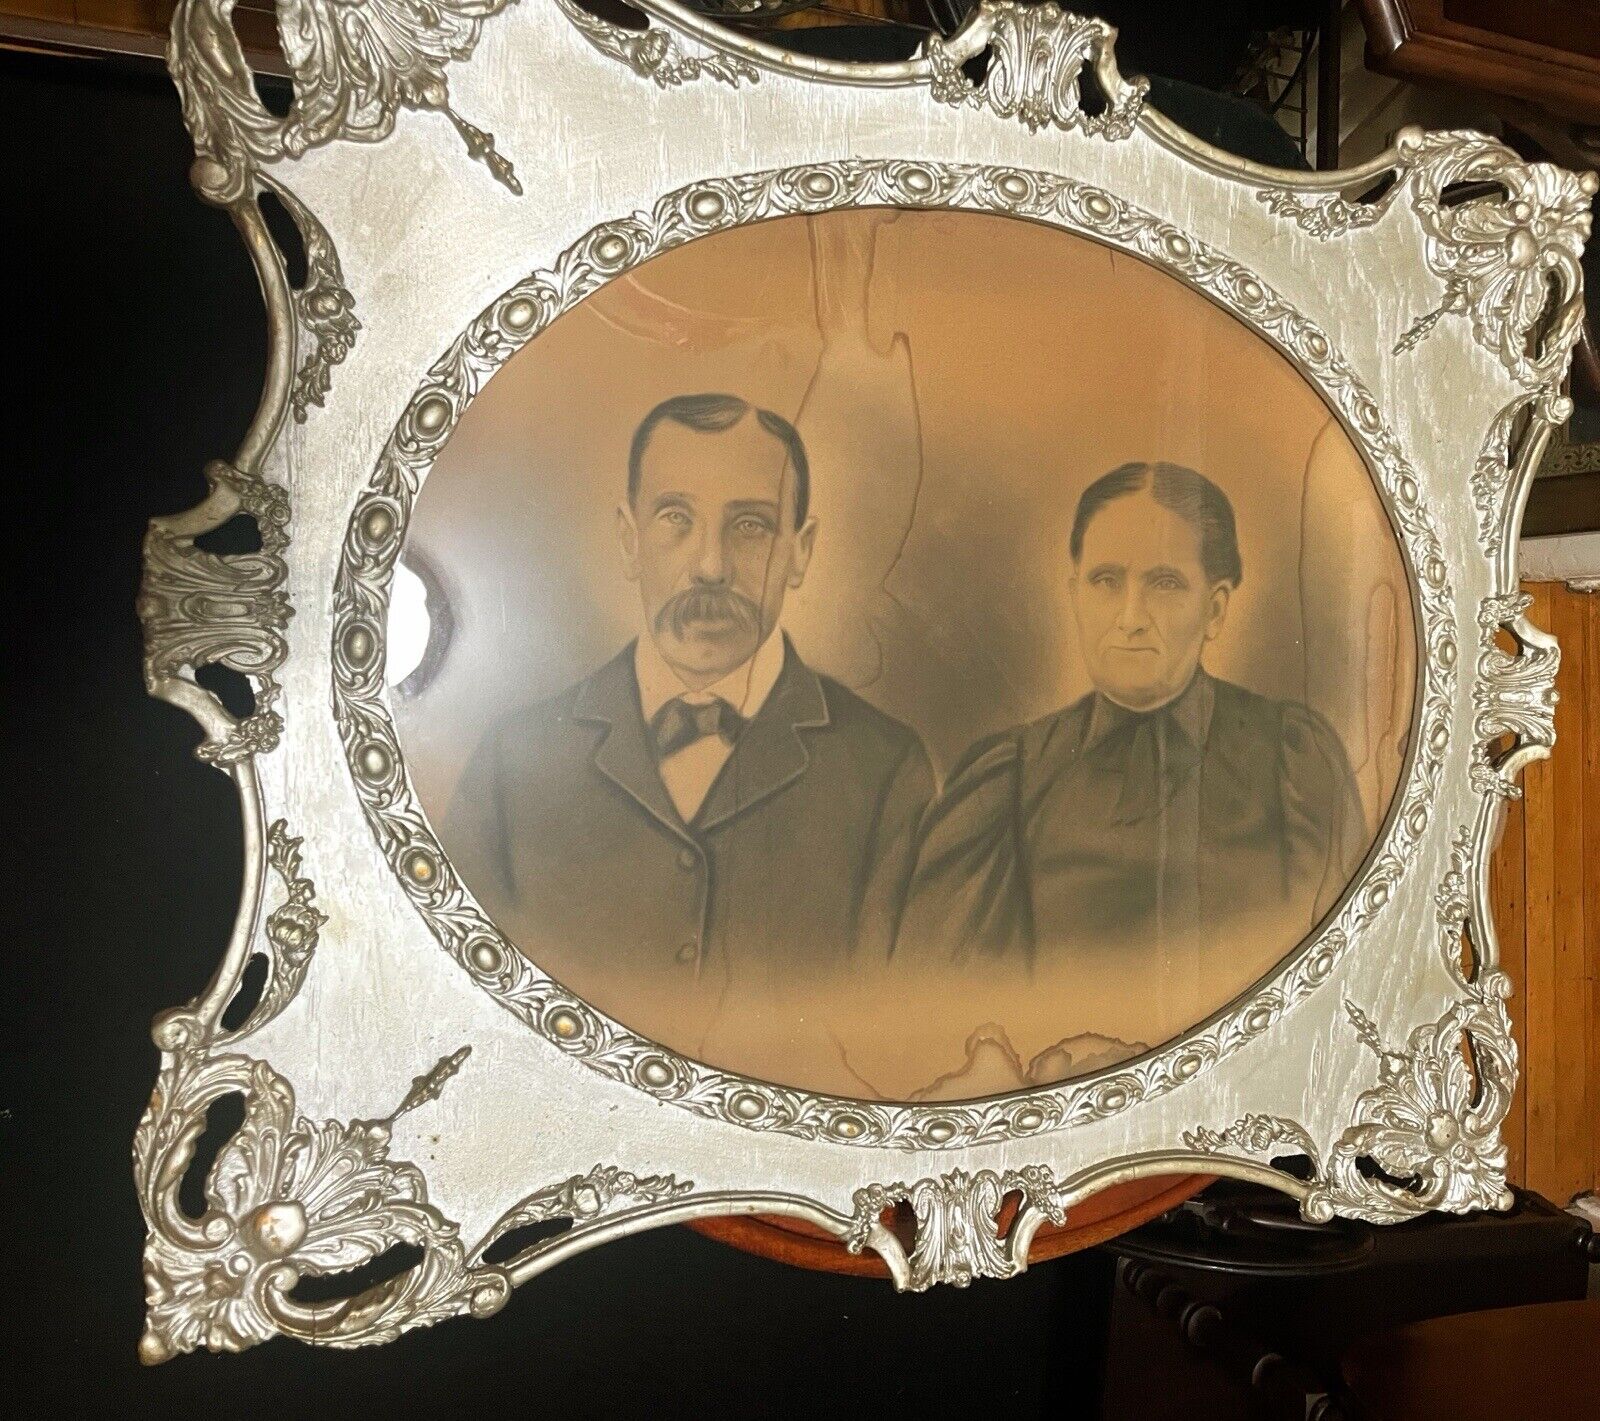 Antique Picture  of a Husband  and Wife,  appears to be 1800s very large, Ornate